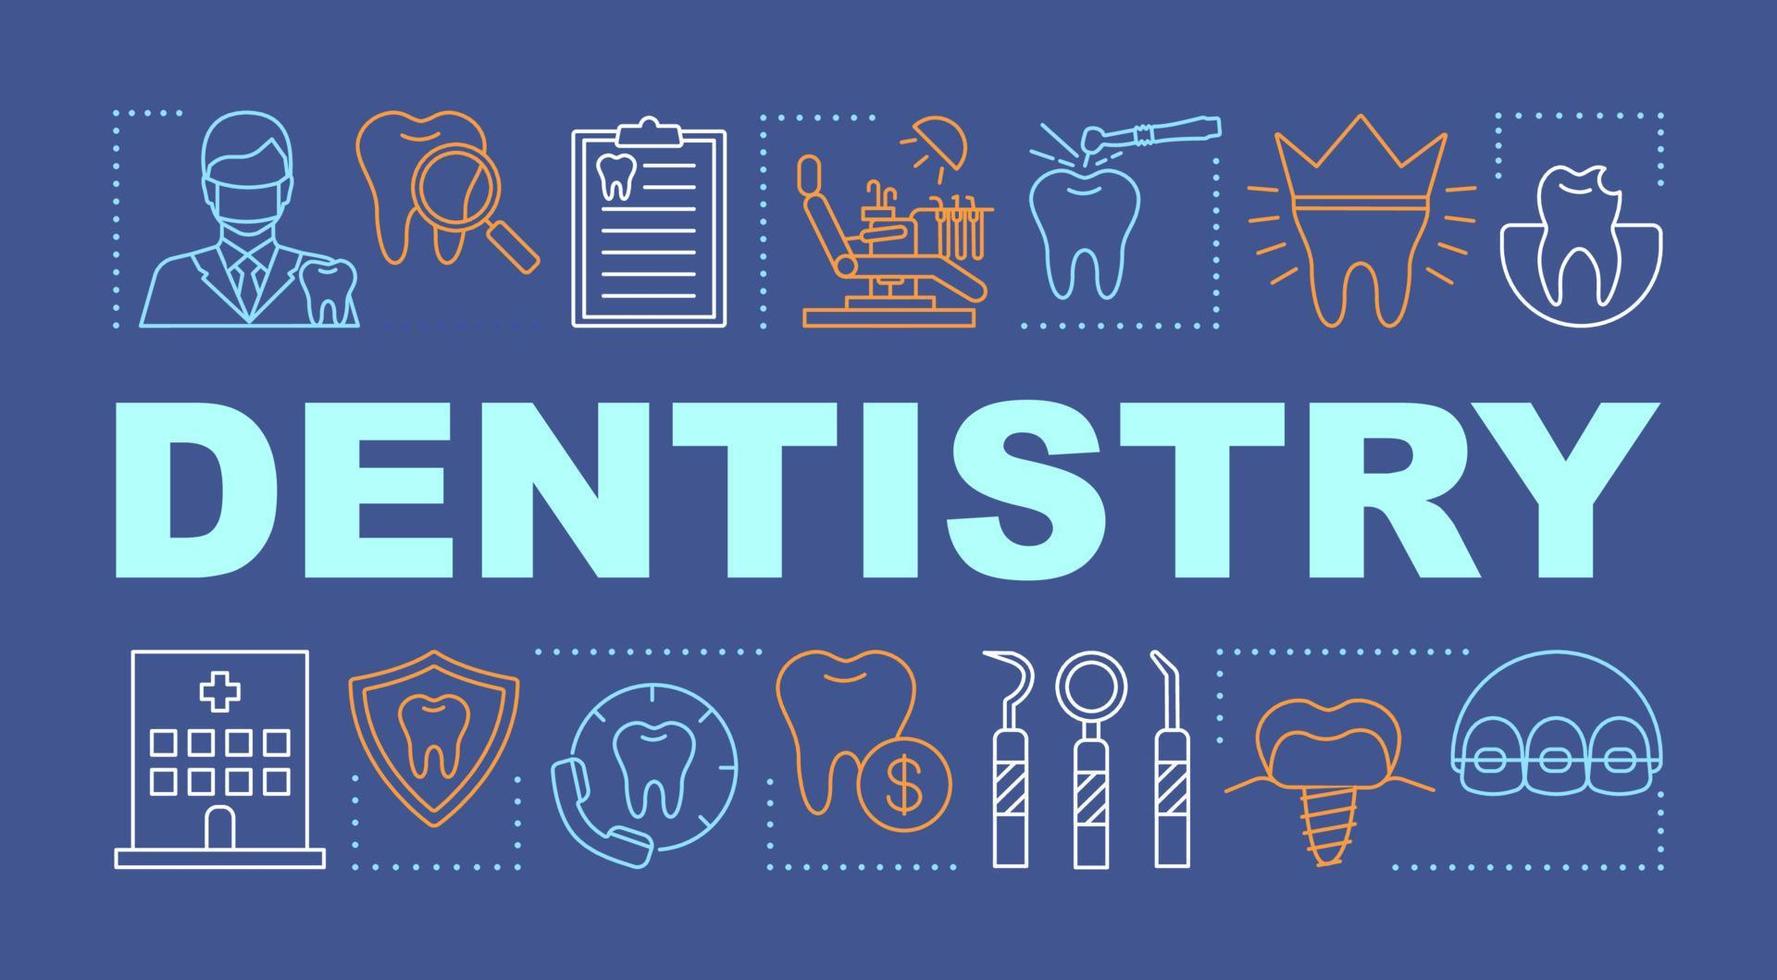 Dentistry word concepts banner. Dentist, dental care, check up, caries prevention, braces. Presentation, website. Isolated lettering typography idea with linear icons. Vector outline illustration